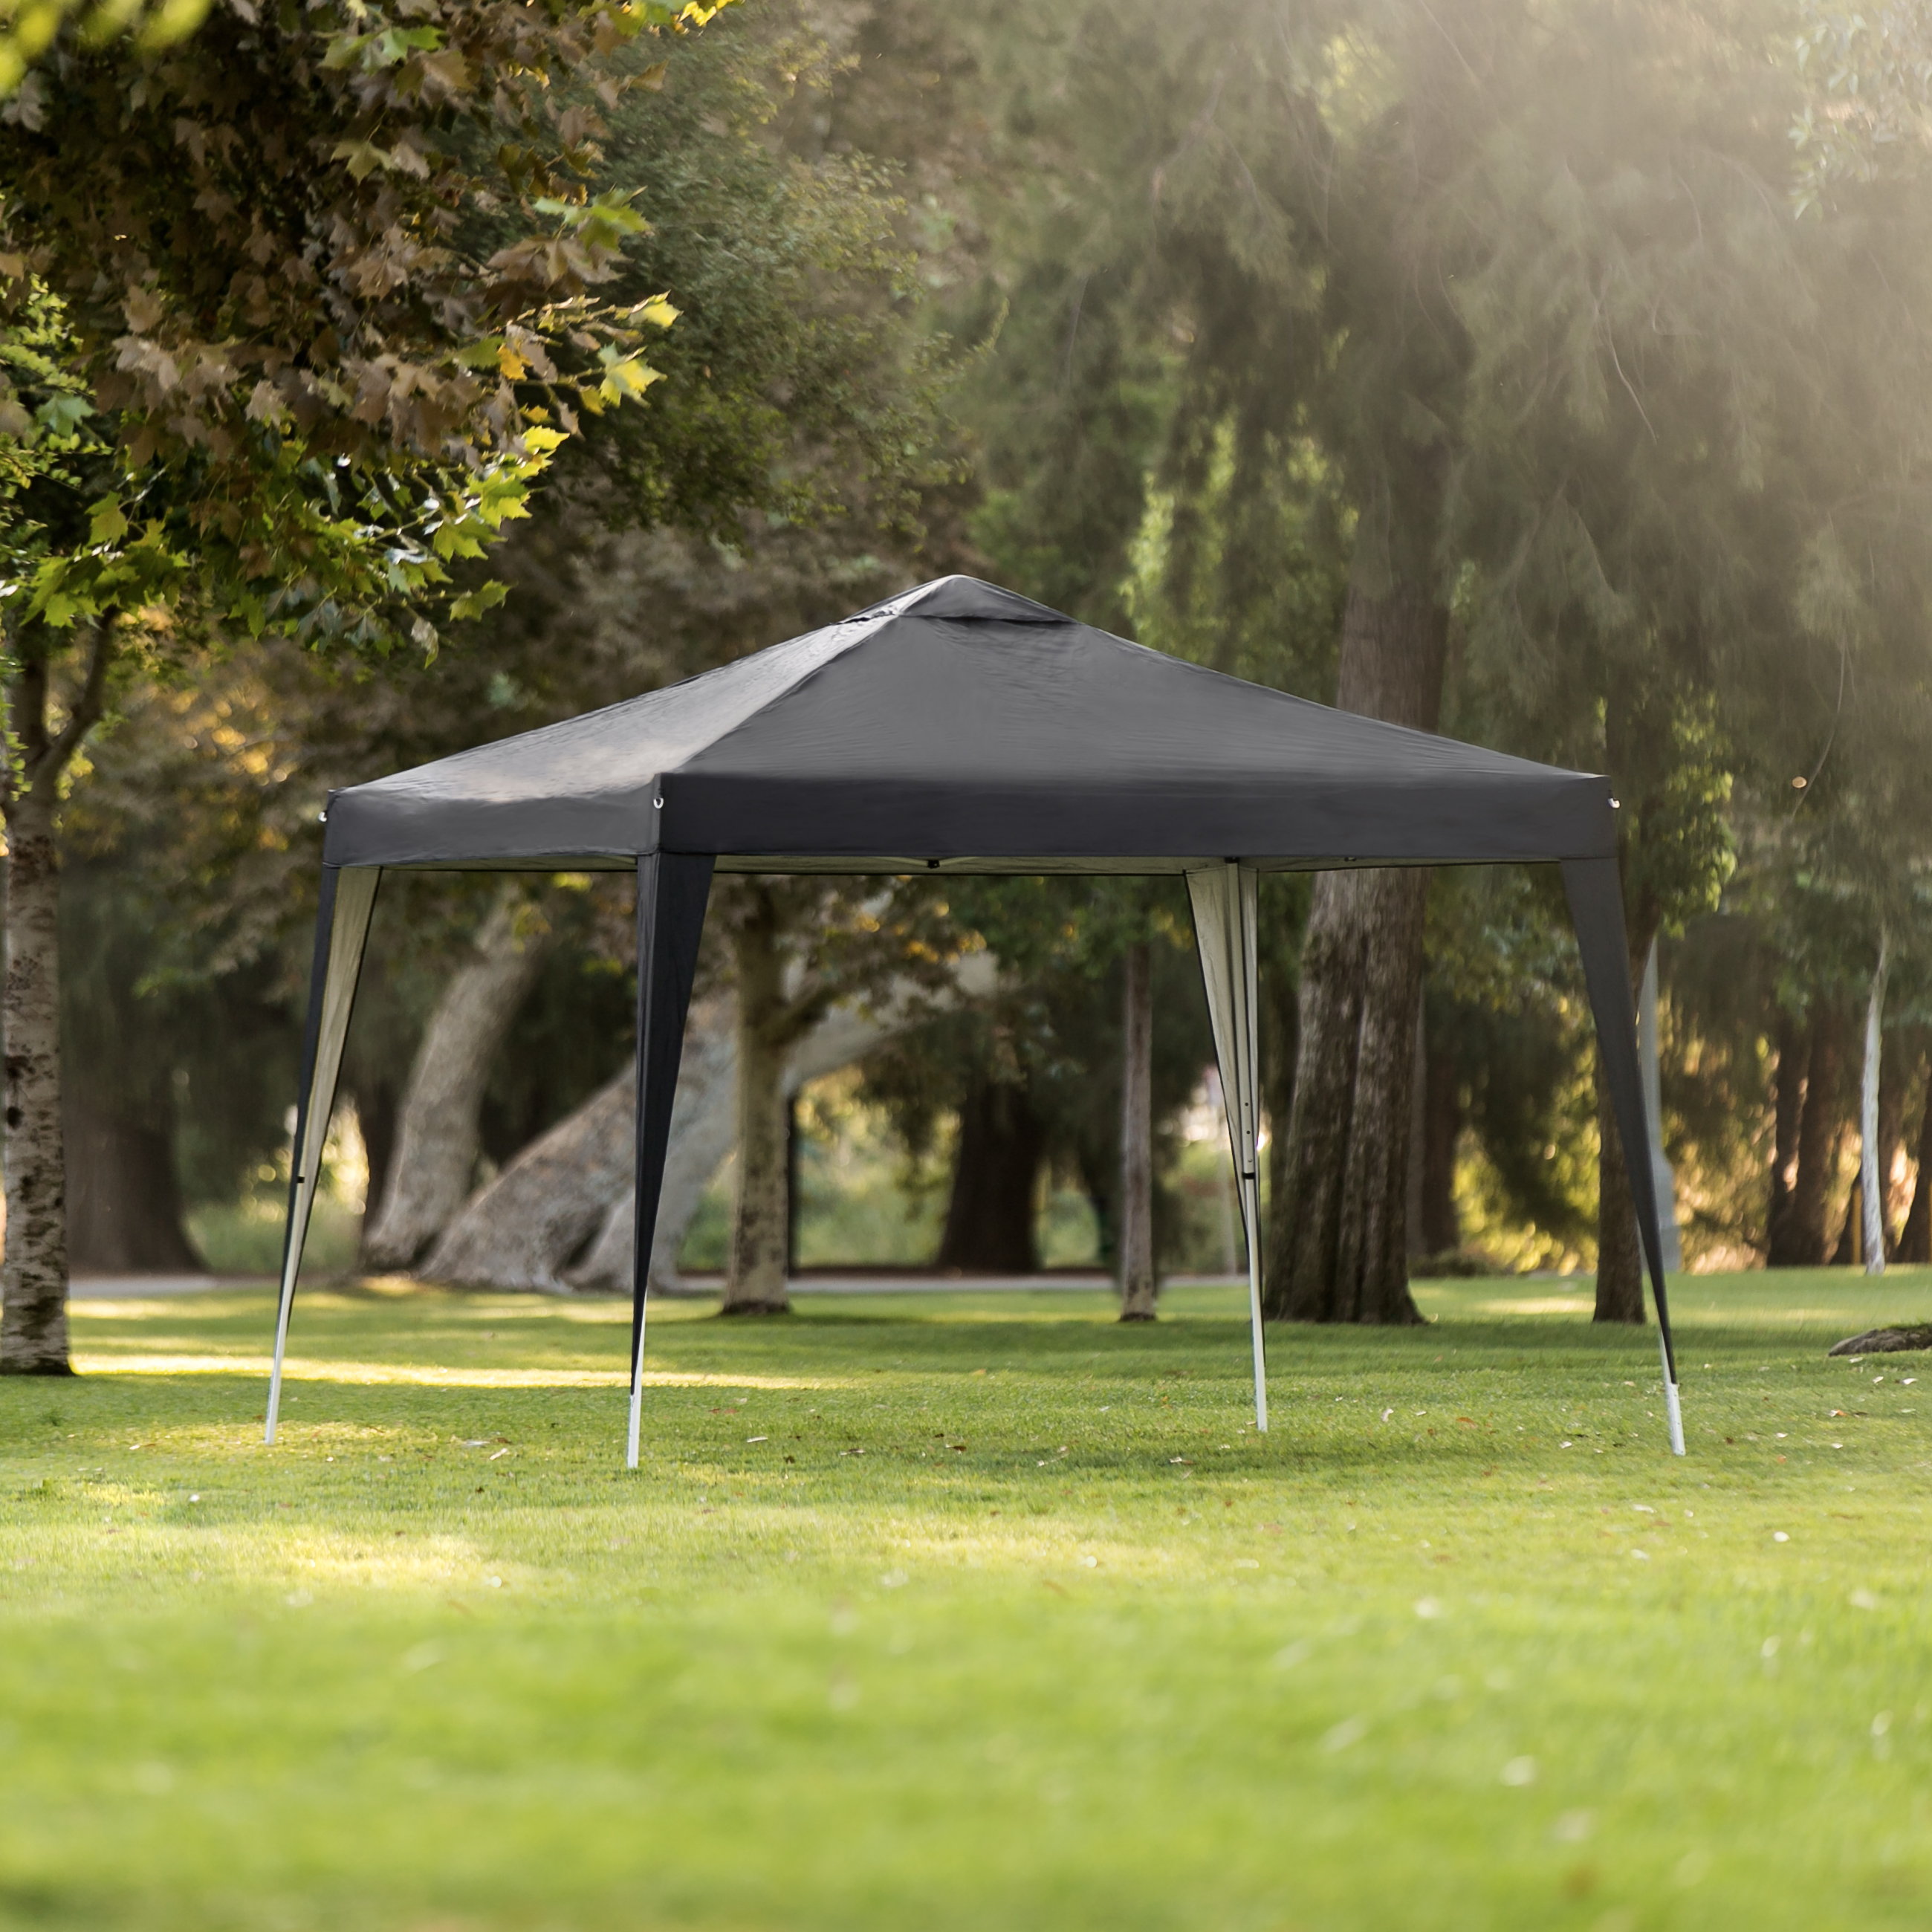 Bcp Outdoor Portable Pop Up Canopy Tent W Carrying Case 10x10ft